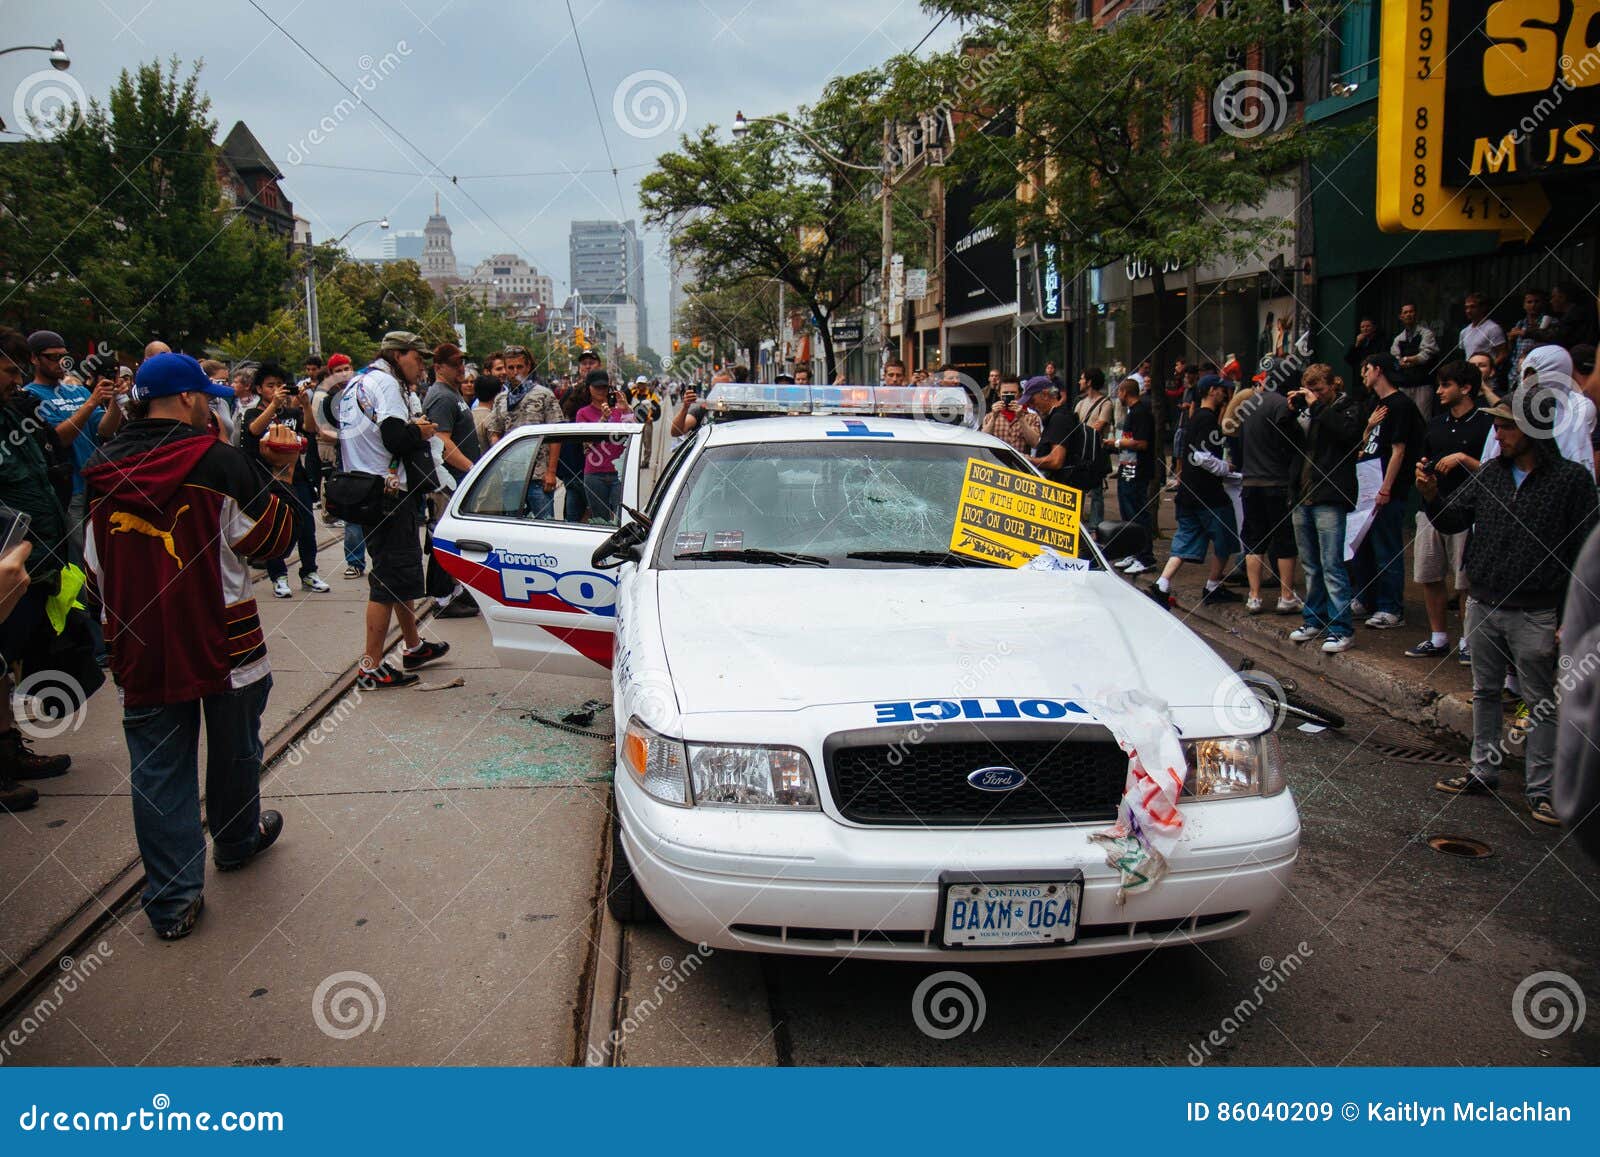 Smashed Police Car Editorial Stock Image Image Of Canada 86040209